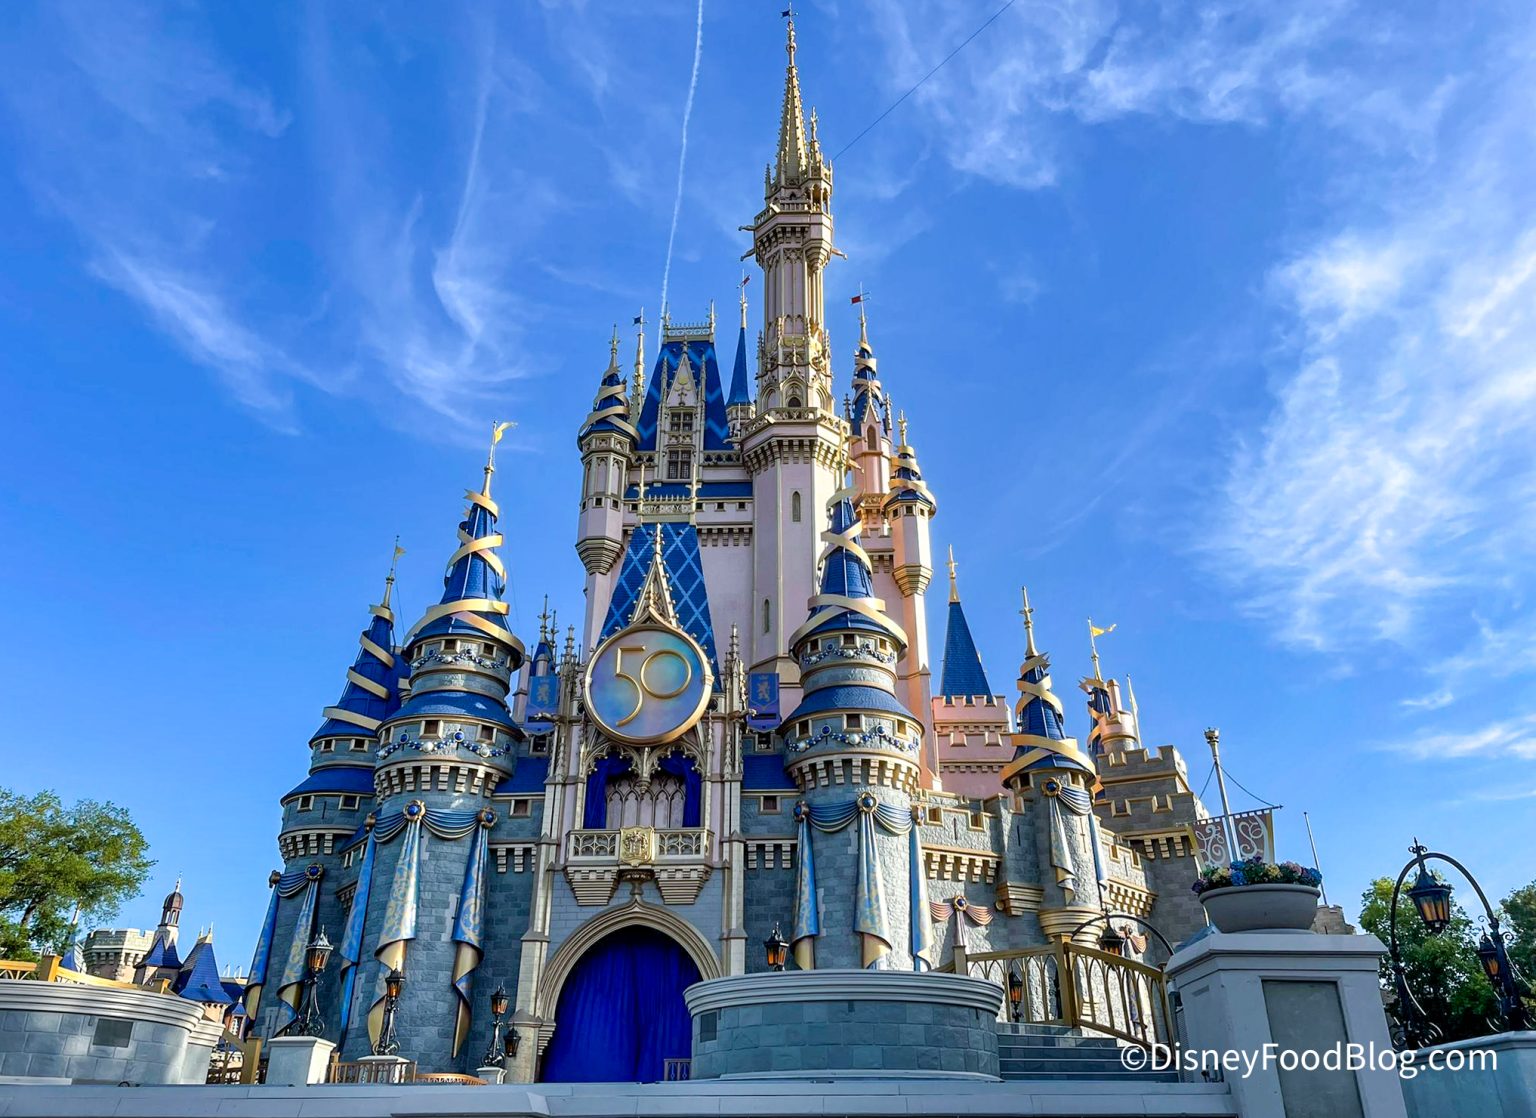 Build Your Own Disney Castle At Home With These Kits! | the disney food ...